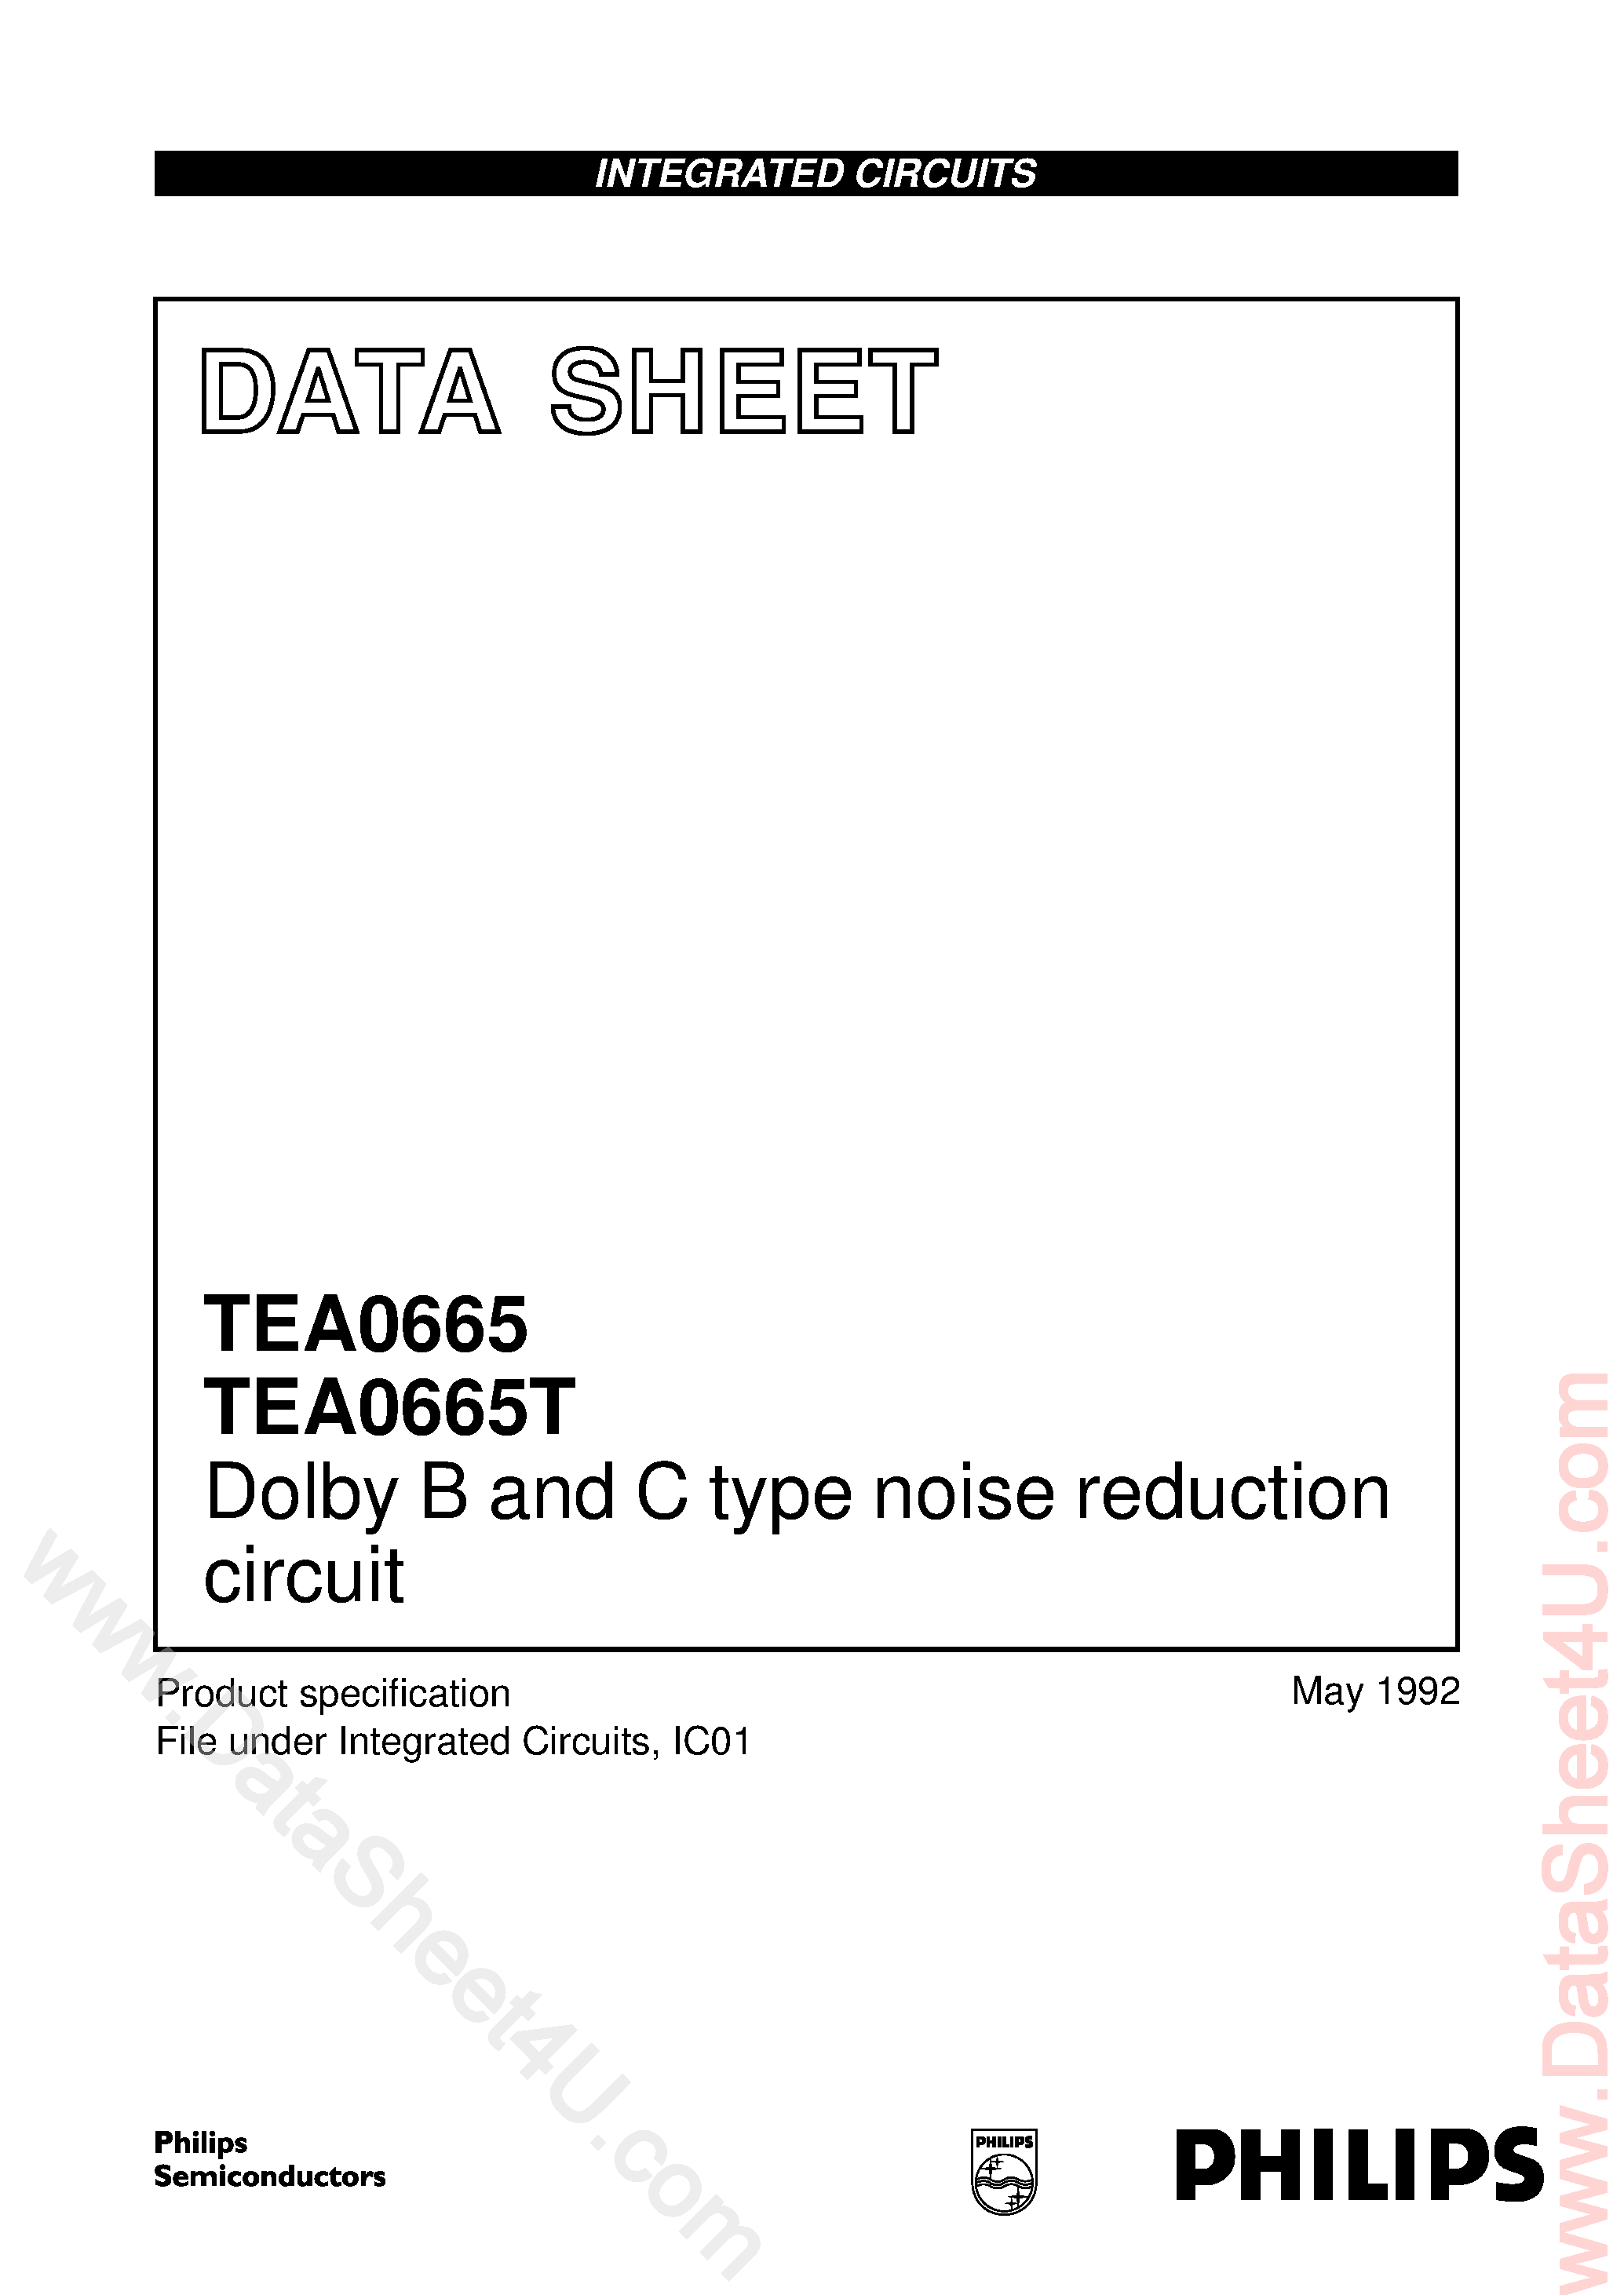 Datasheet TEA0665 - Dolby B and C Type Noise Reduction Circuit page 1